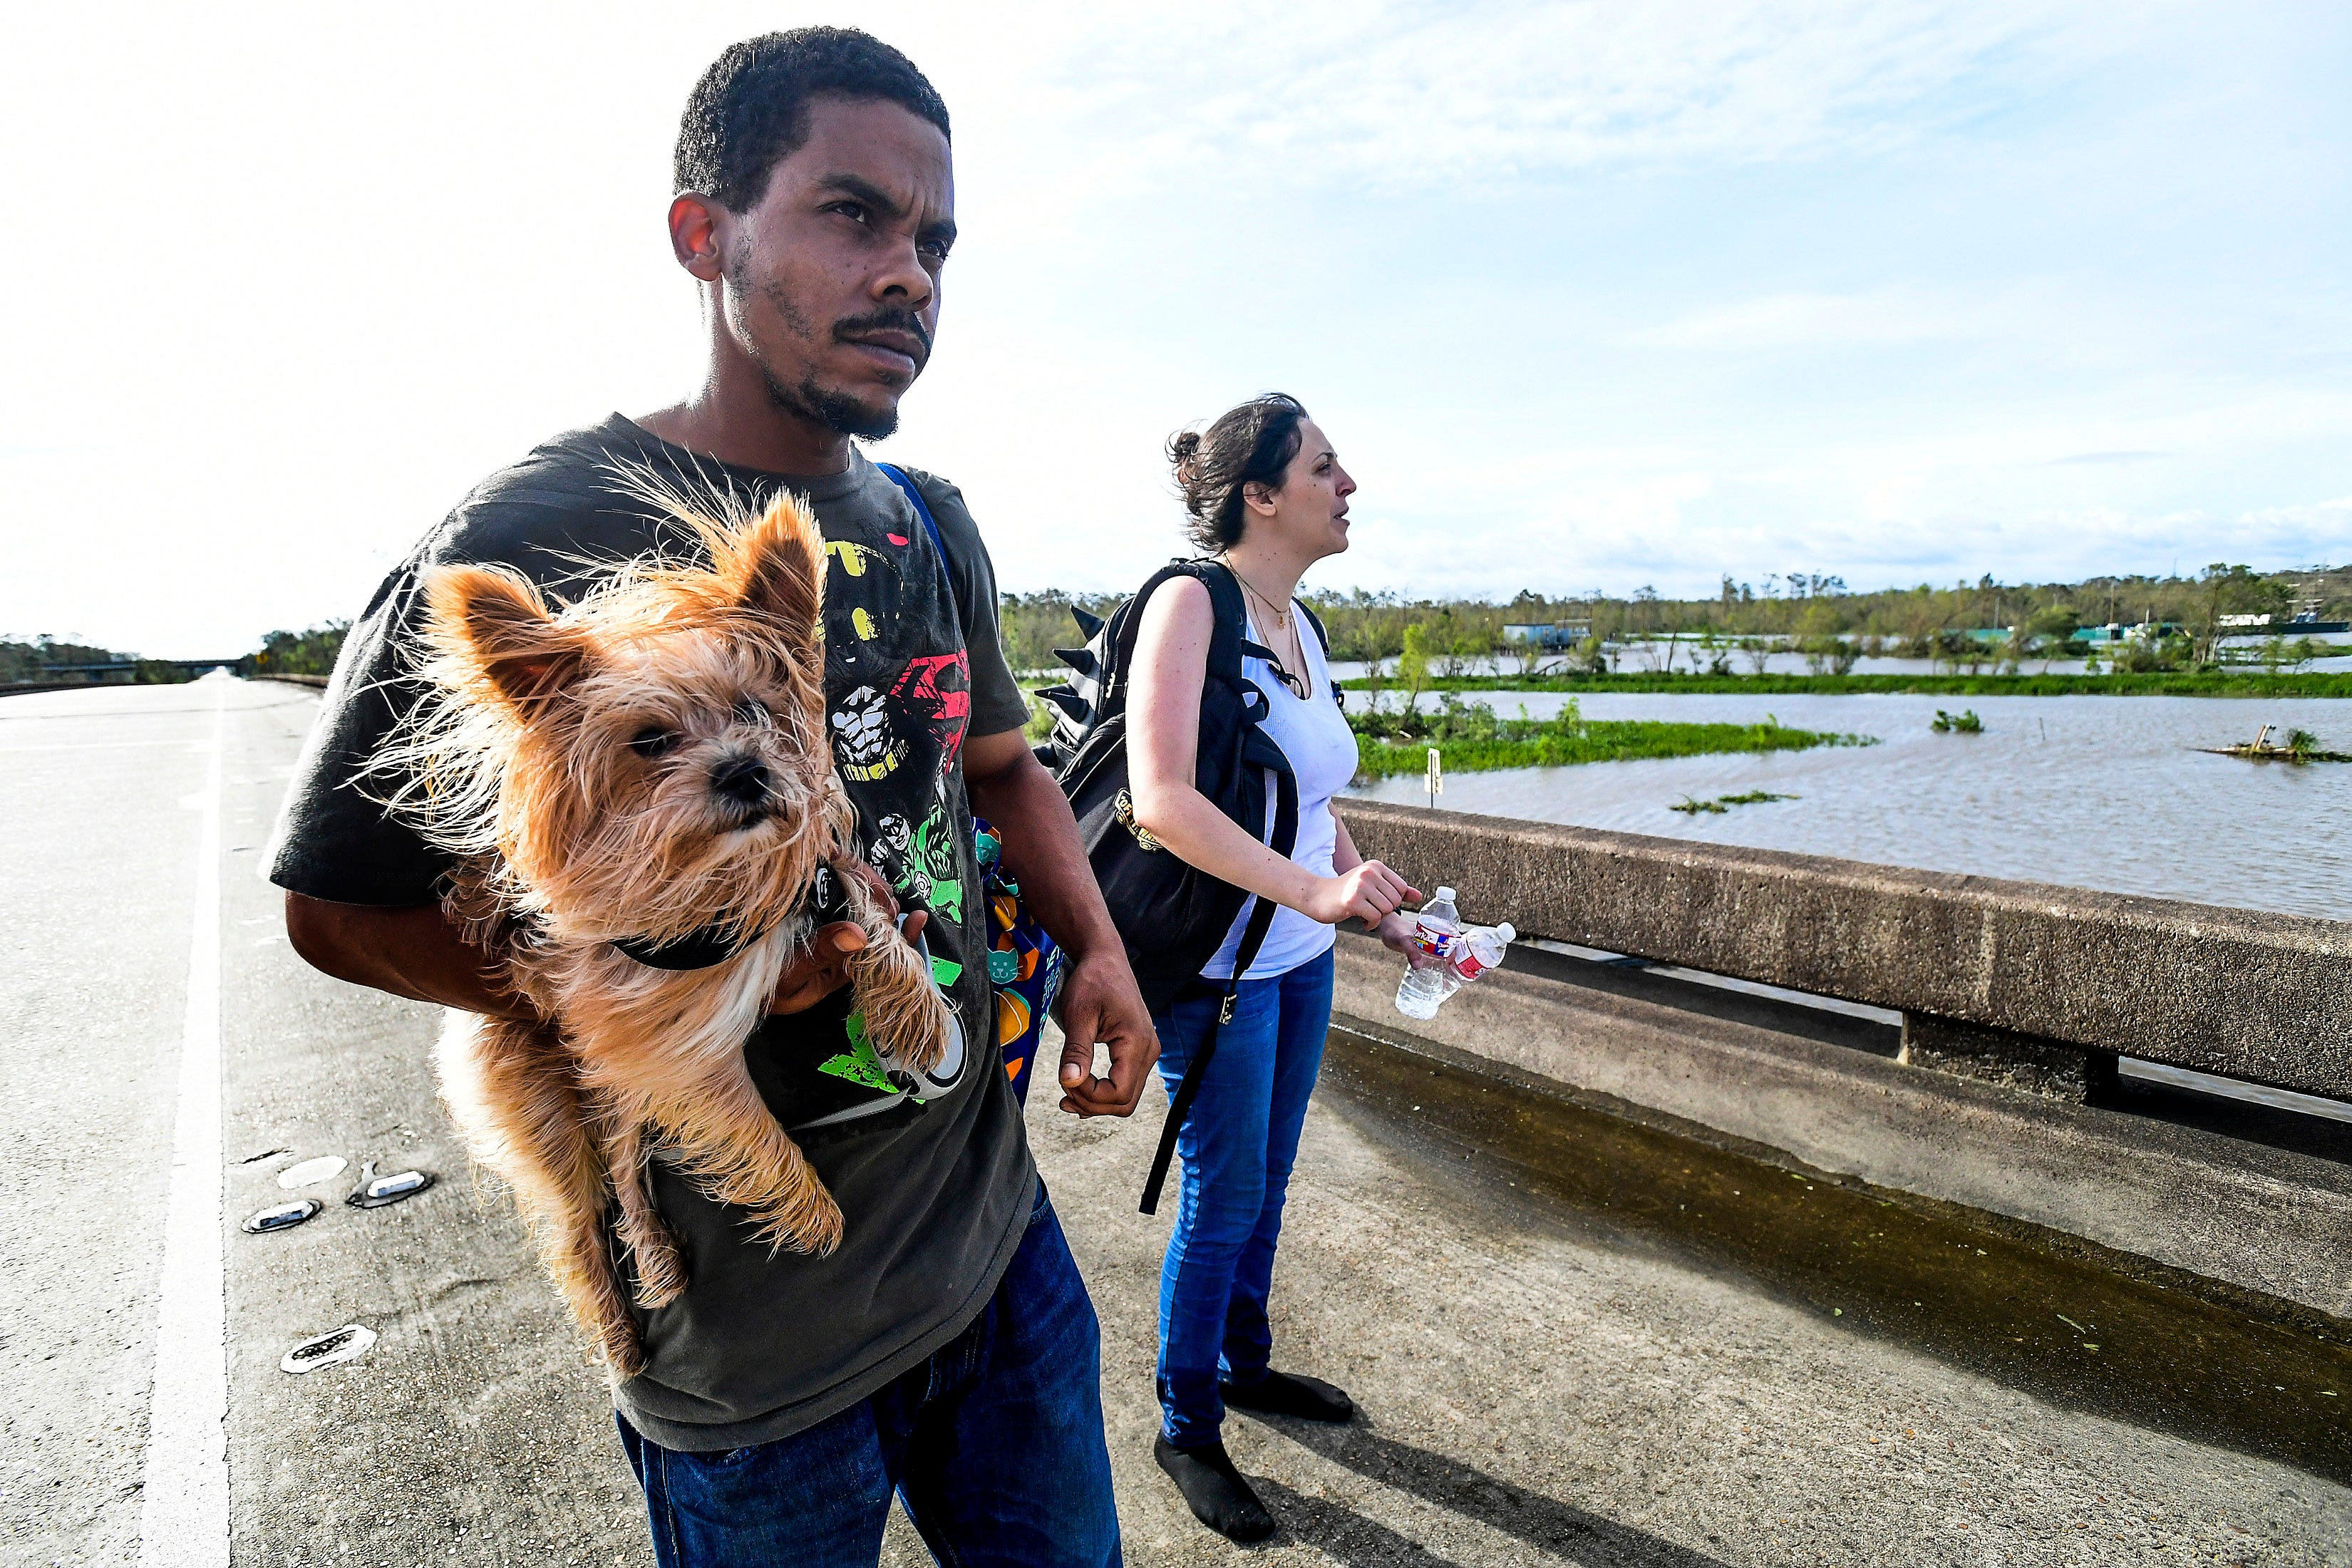 Soloman Smith holds Walle and Jake Sikaffy on foot along I-10 after being rescued from their damaged home in LaPlace, Louisiana by a boat on Monday, August 30, 2021, after Hurricane Ida made landfall in Louisiana on Sunday August 29, 2021.